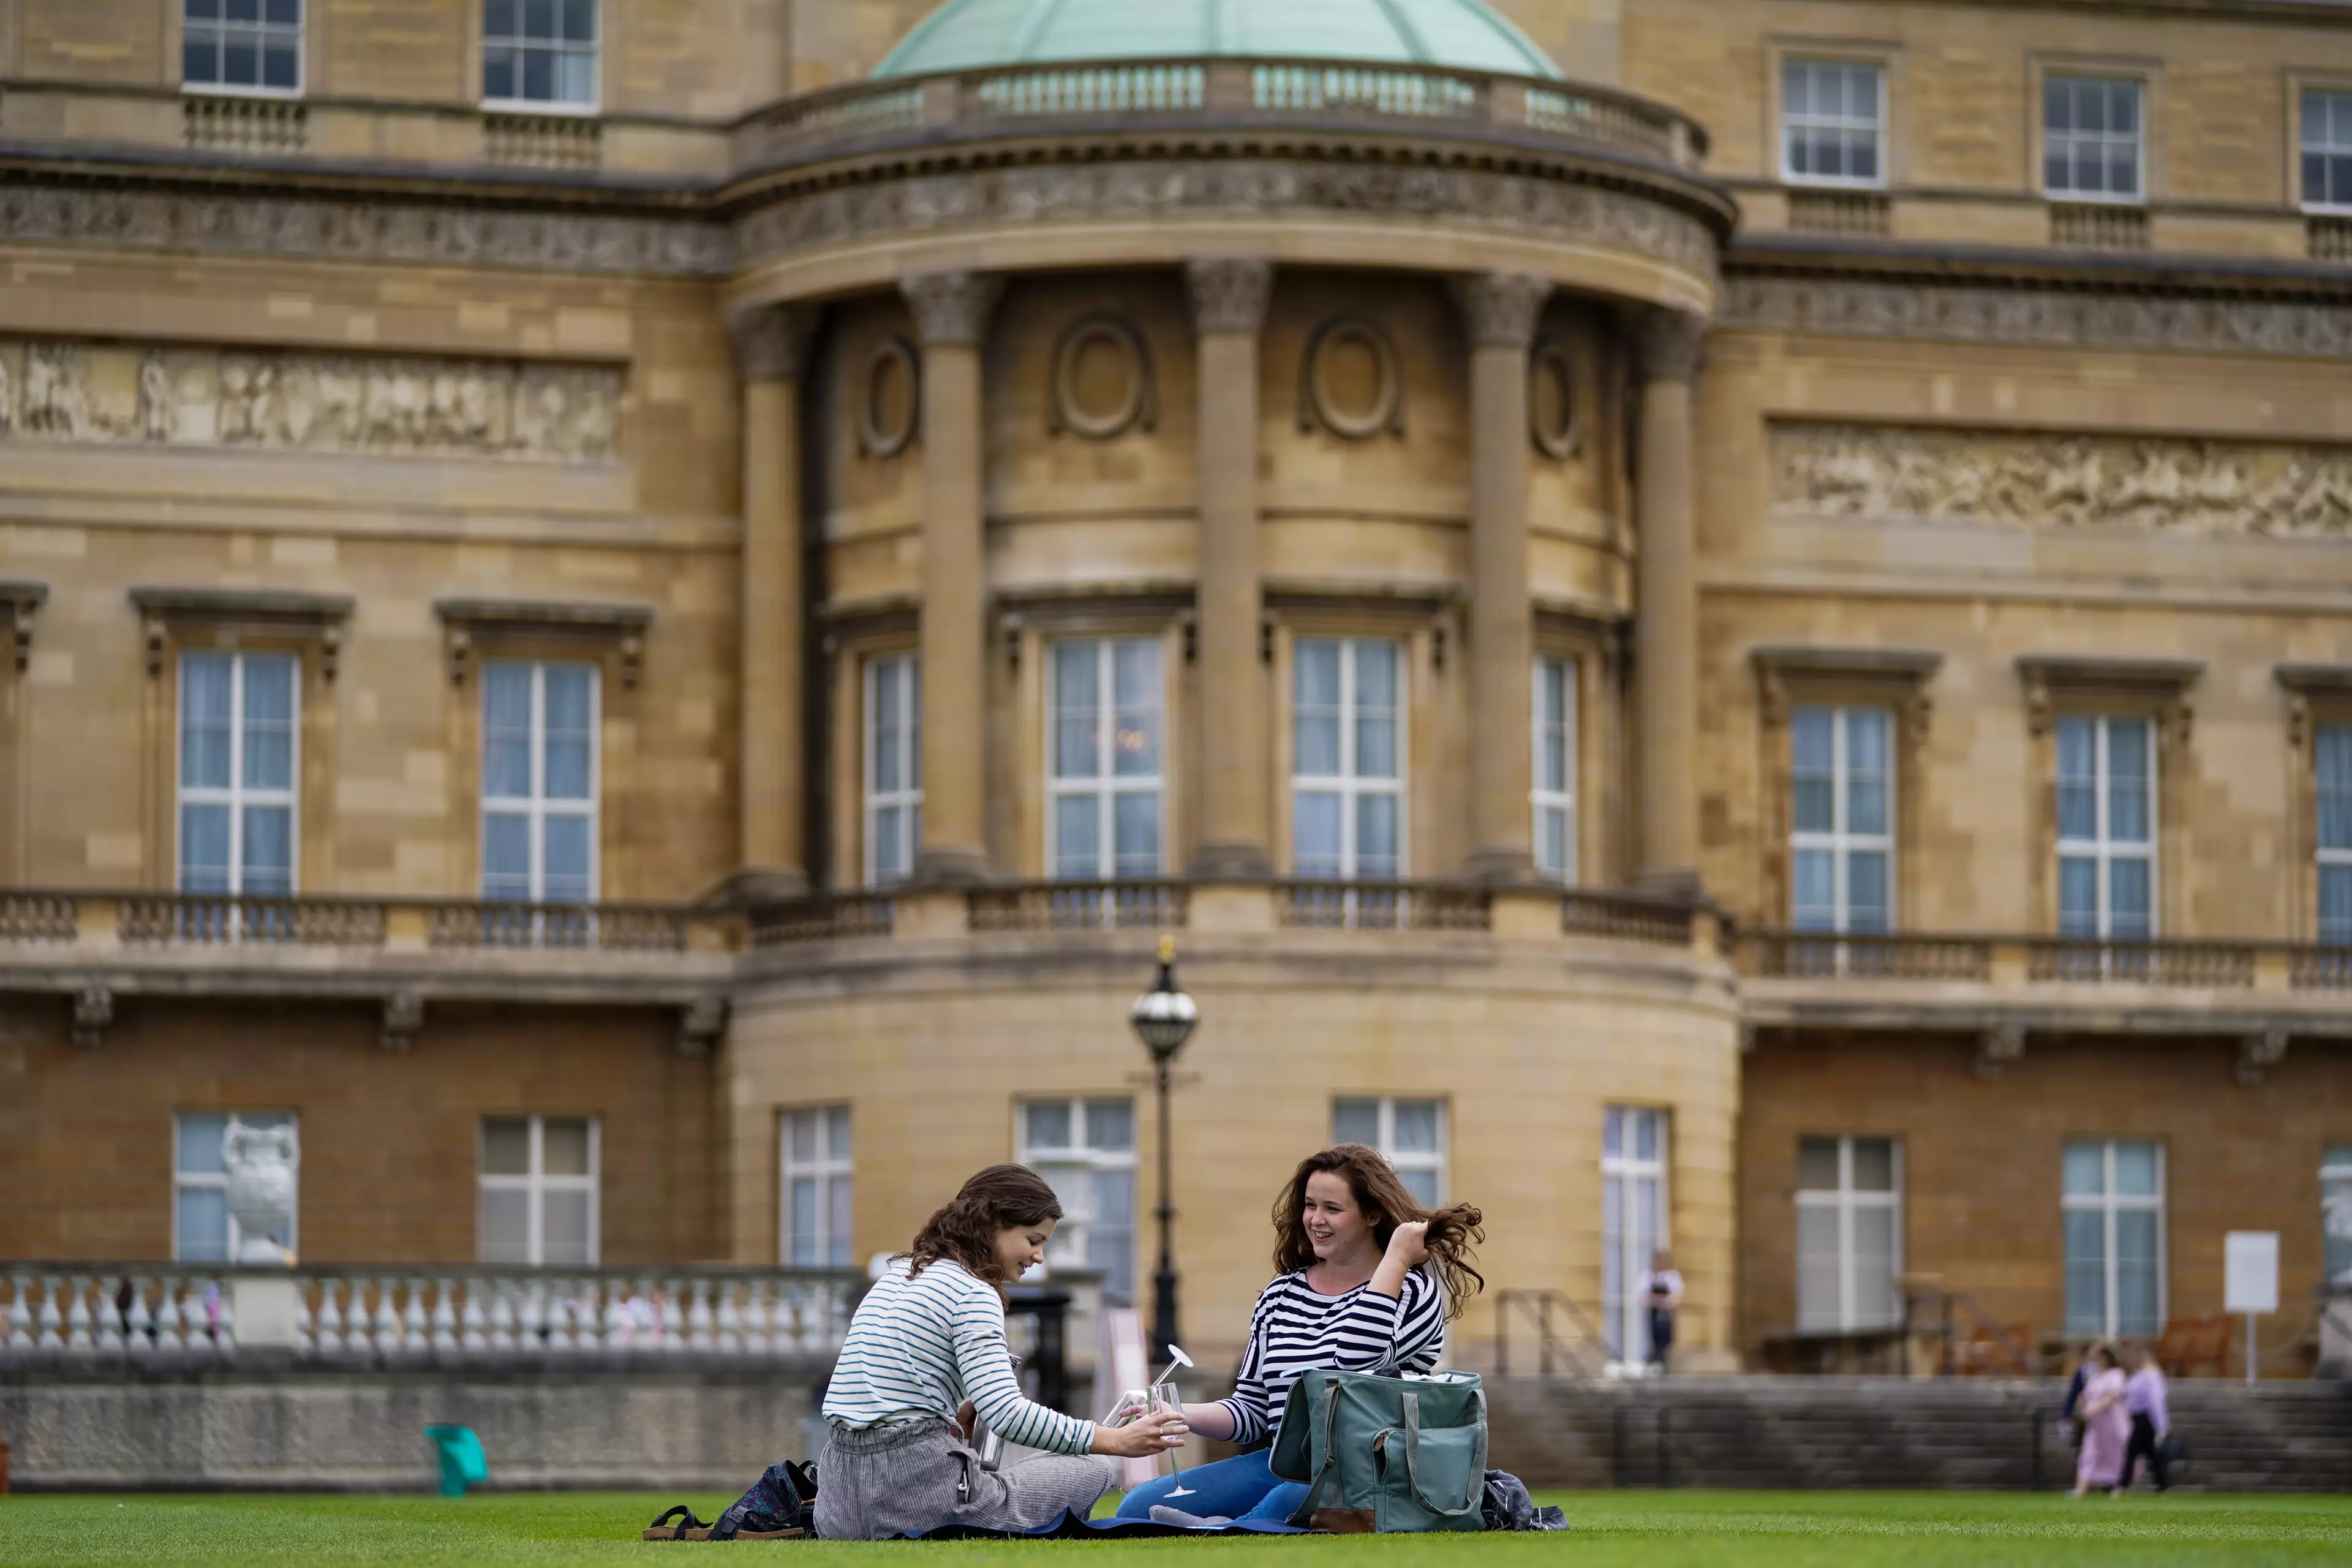 You can now take a picnic on the grounds for the first time ever (